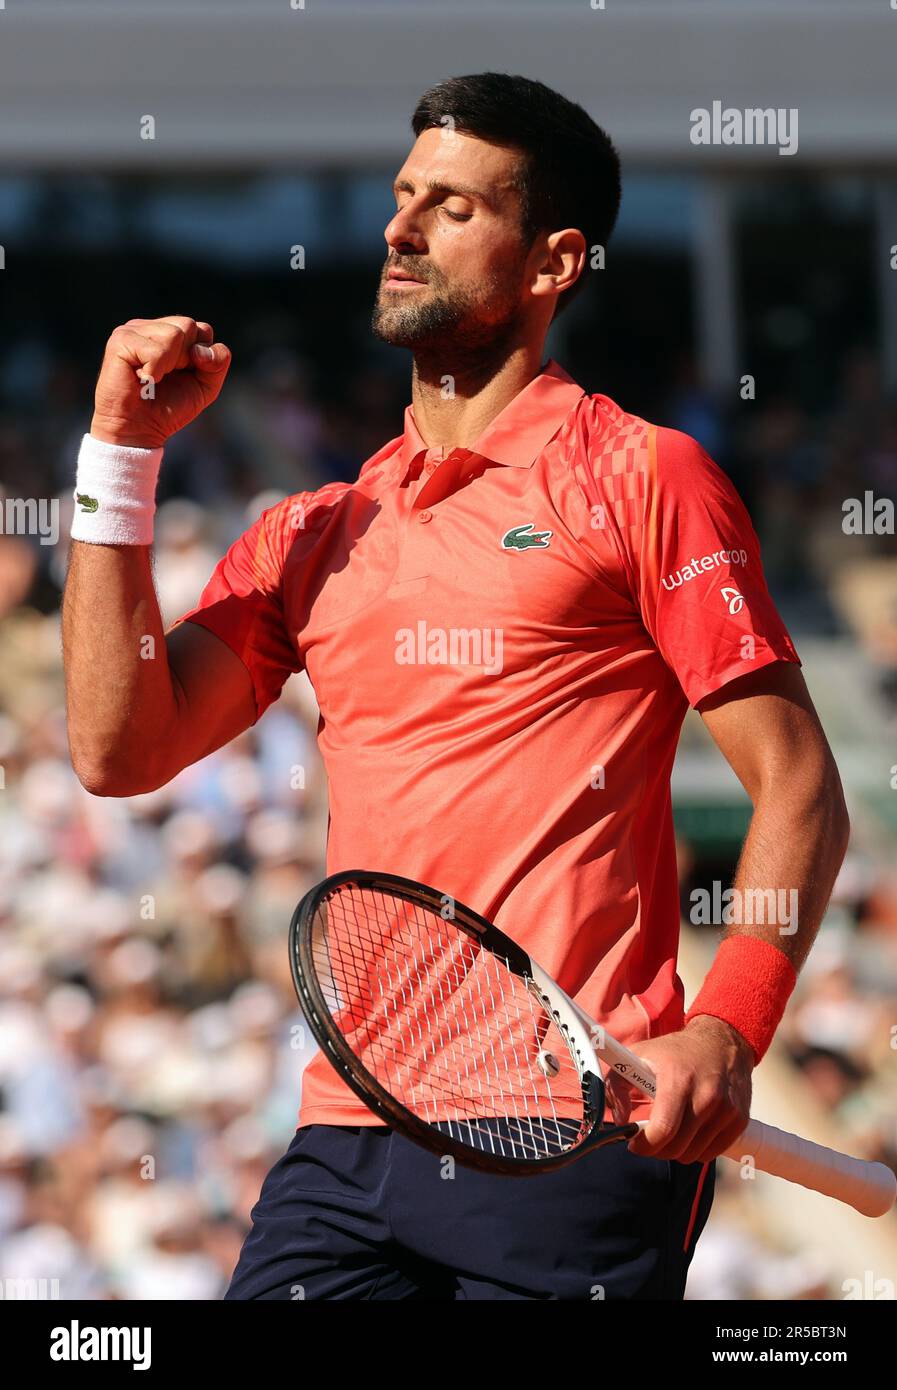 Paris, France. 02nd June, 2023. Third-seeded Novak Djokovic of Serbia plays against Alejandro Davidovich Fokina of Spain during their third-round match at the Roland Garros French Tennis Open in Paris, France, on Friday, June 2, 2023. Djokovic won 7-6, 7-6, 6-2. Photo by Maya Vidon-White/UPI Credit: UPI/Alamy Live News Stock Photo